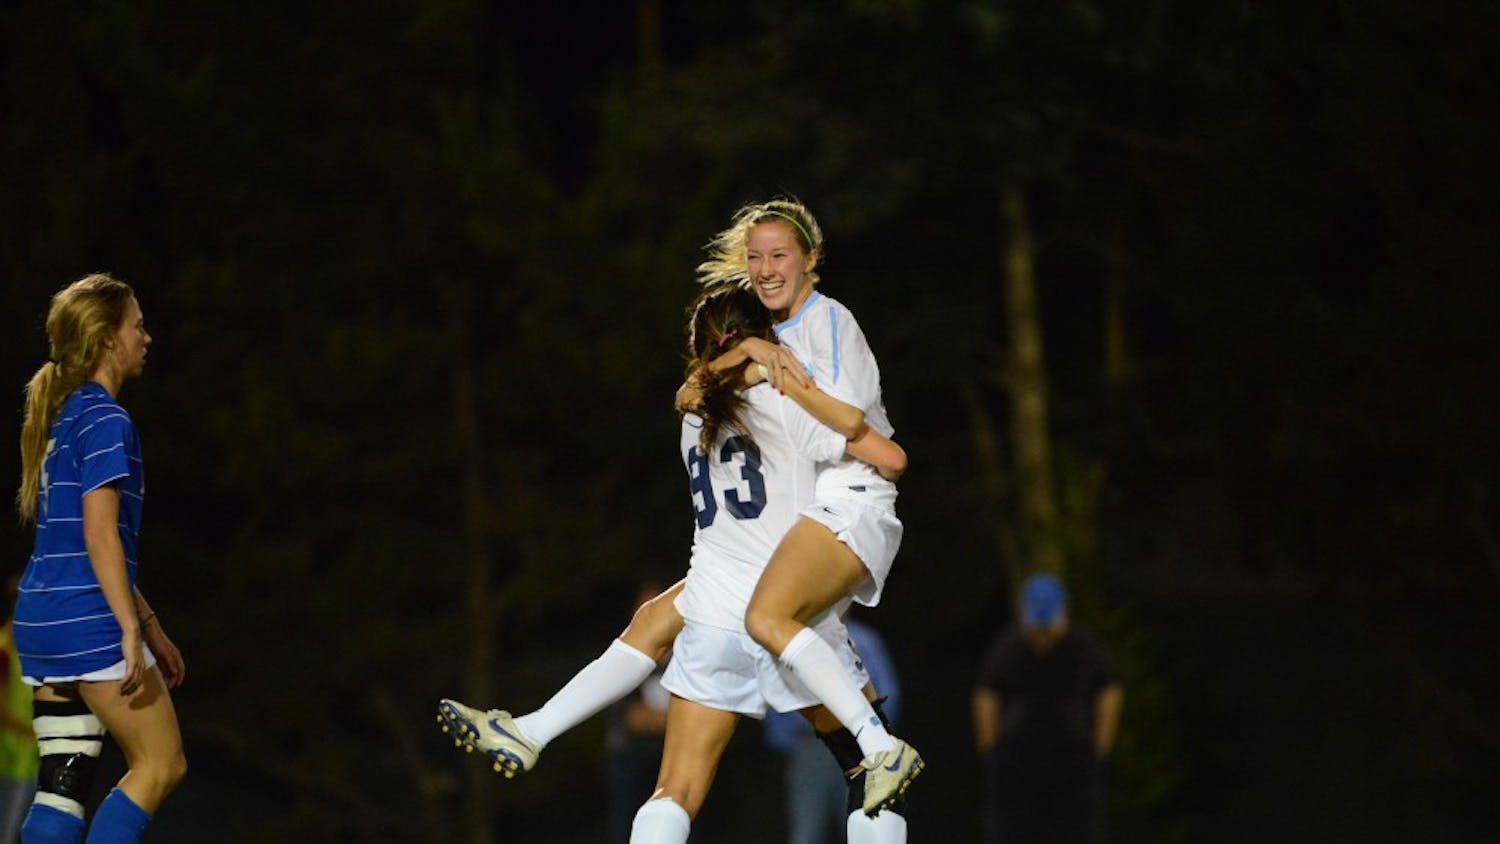 	Cameron Castleberry (left) celebrates with Brooke Elby after scoring her first career goal in the 35th
minute against Duke Thursday at Fetzer Field. UNC took the match 3-0 and will play again Sunday.